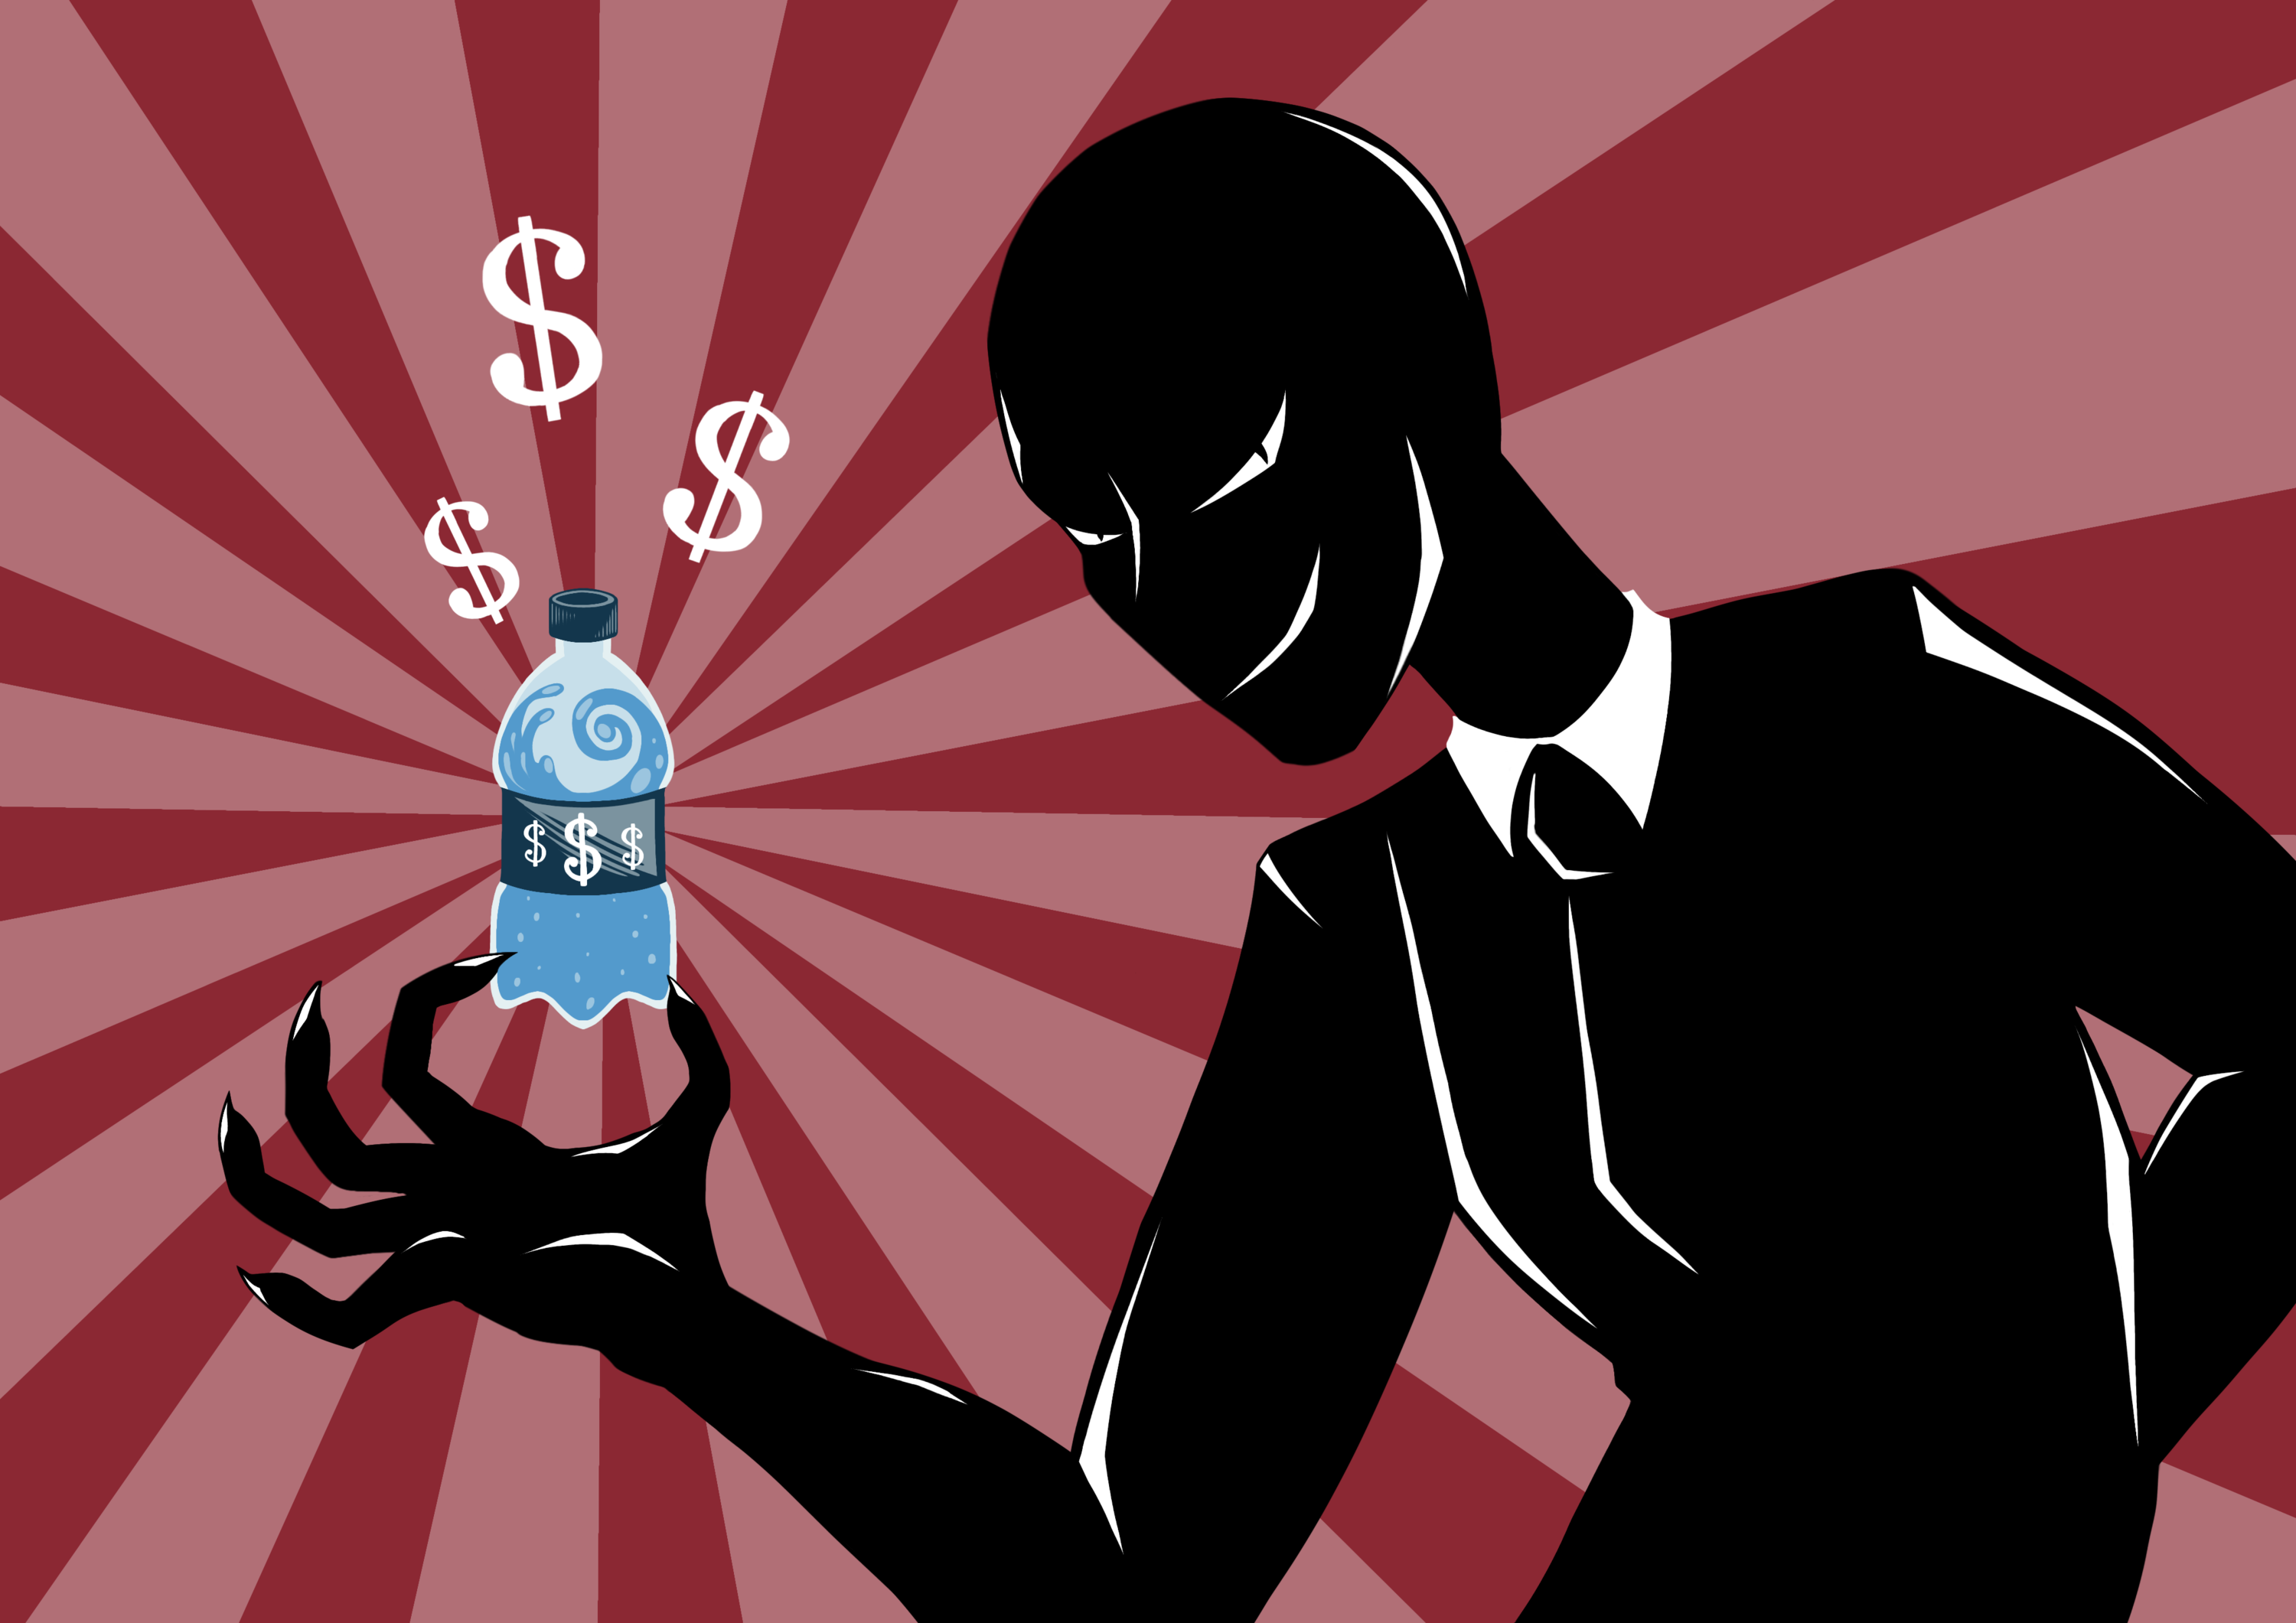 Illutration od evil figure holding bottle of water with dollar signs